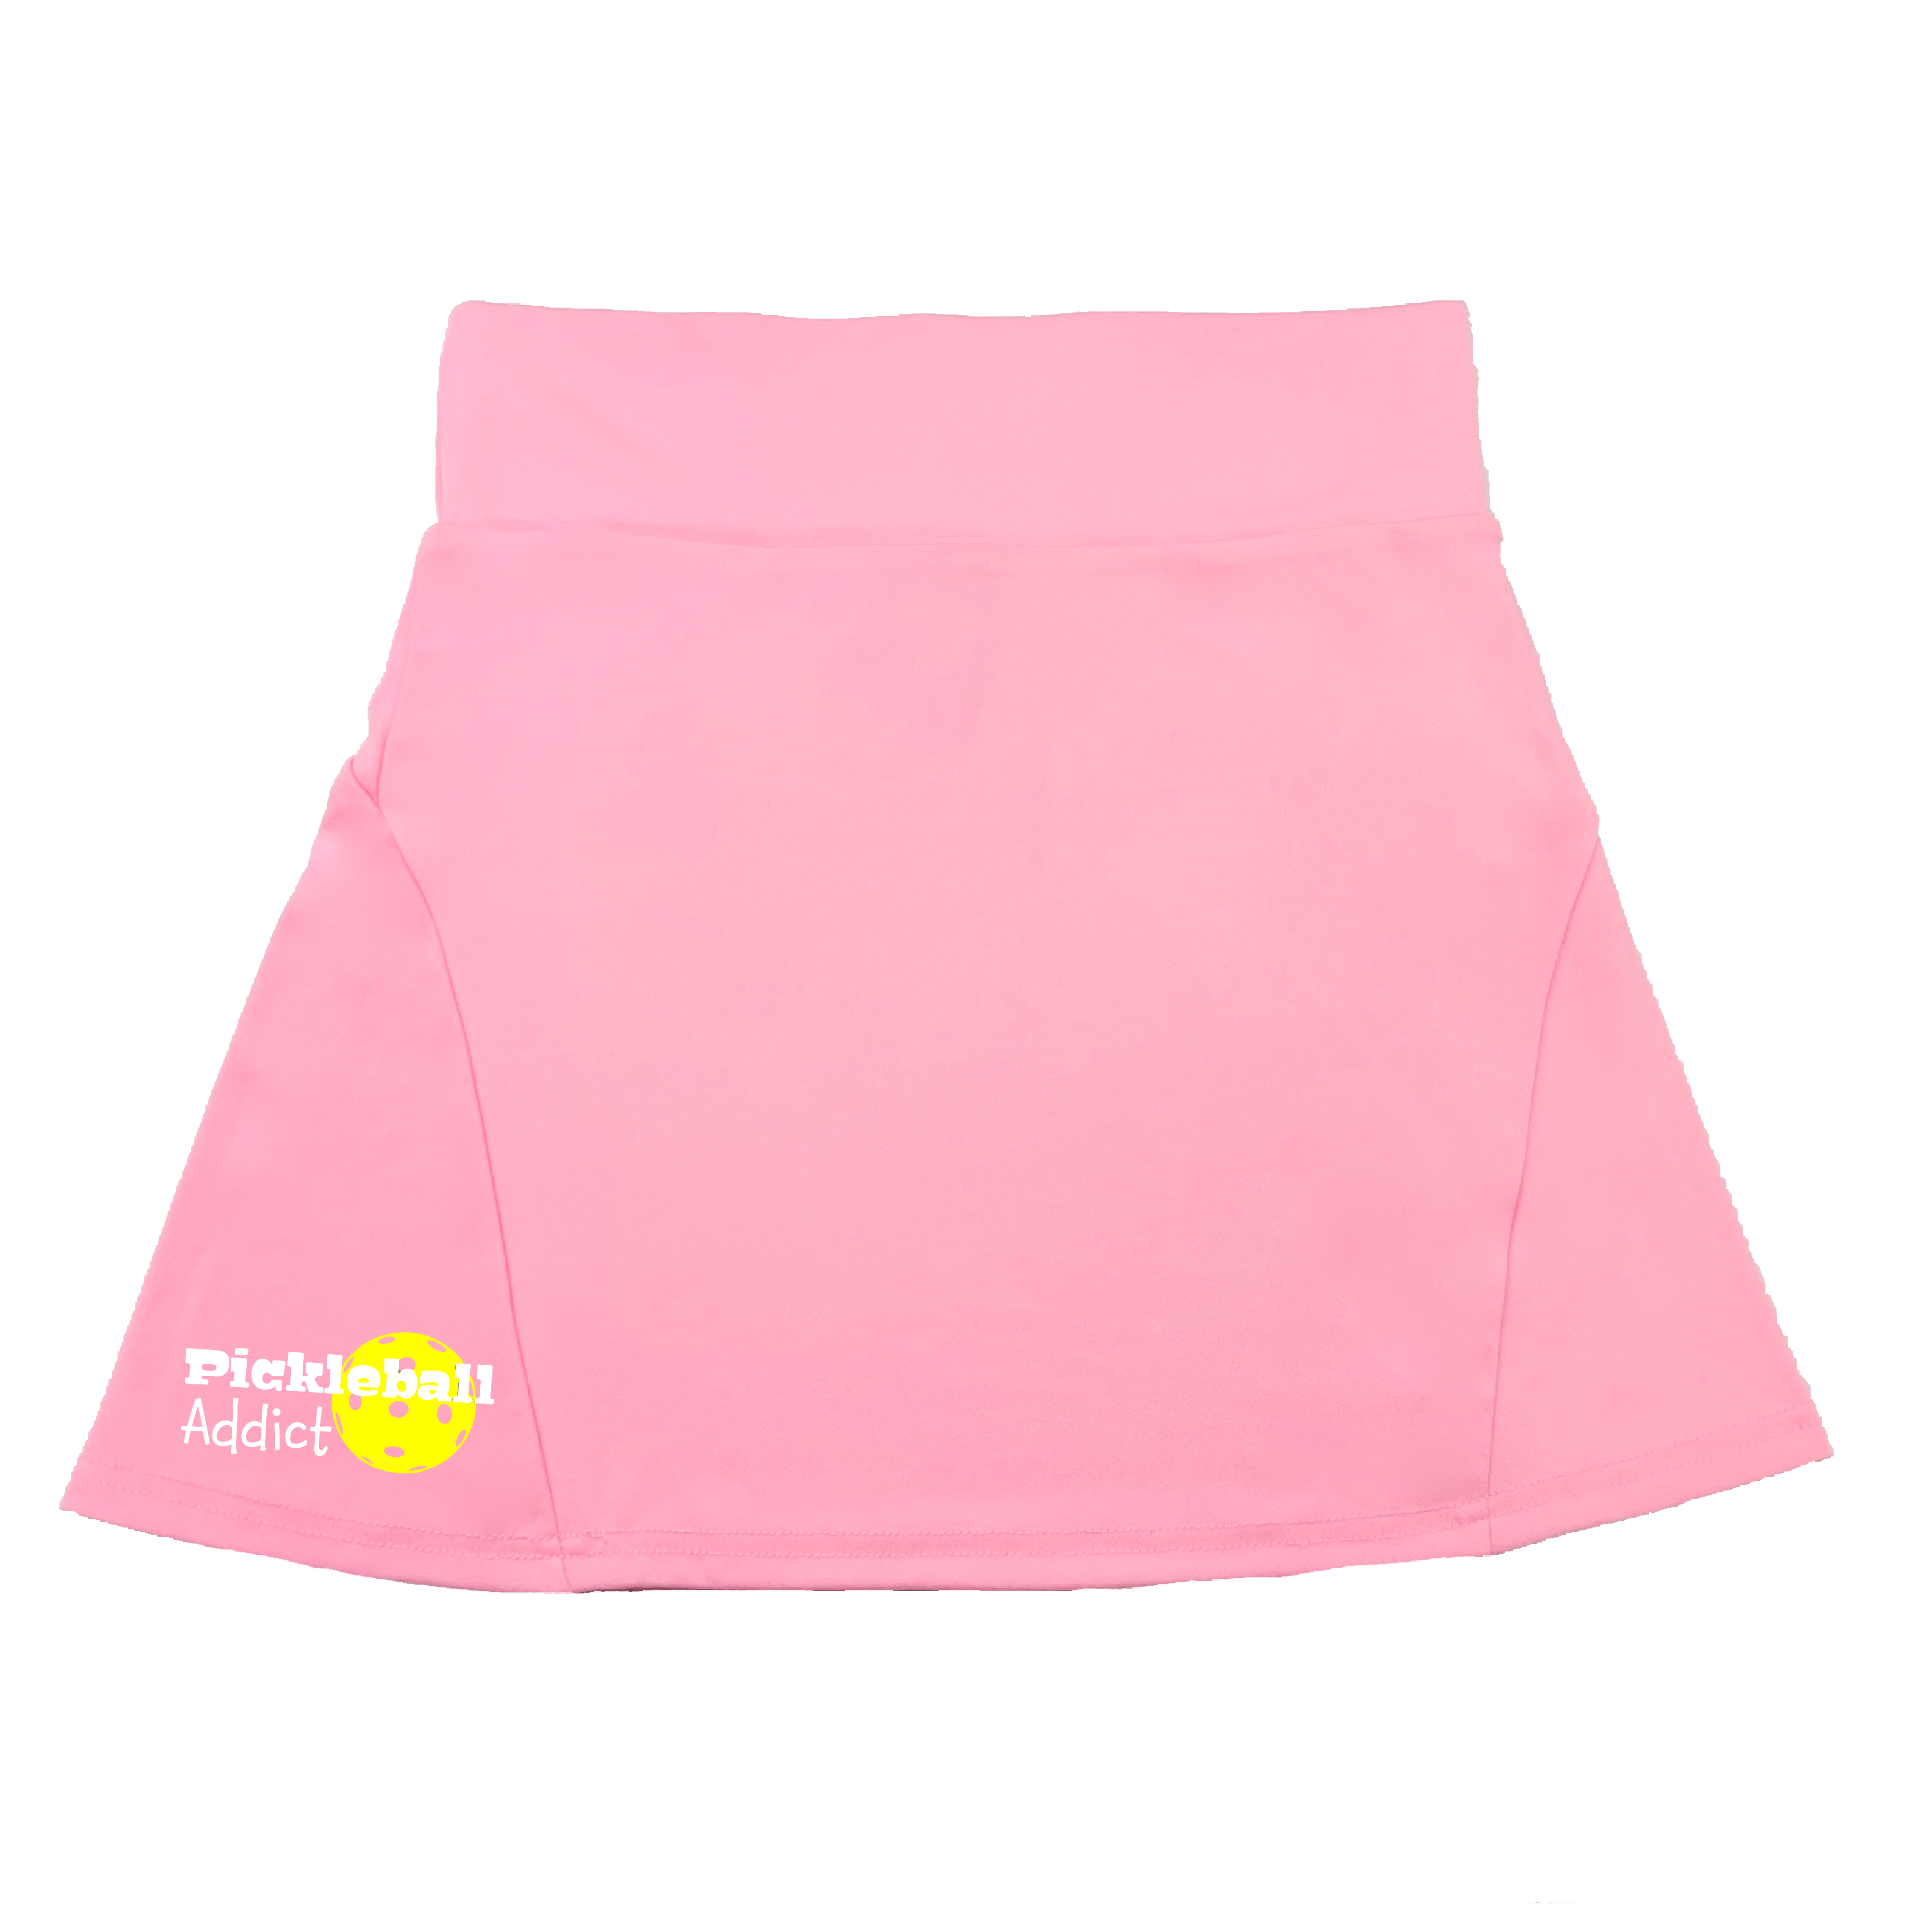 Pickleball Flirty Skort Design:  Pickleball Addict  These flirty skorts have a flat mid-rise waistband with a 3 inch waistband.  Light weight without being see through and the material wicks away moisture quickly.  Flirty pleats in the back with inner shorts for free movement and stylish coverage on the courts.  A functional zipper pocket on the back and two built in pockets on the shorts for convenient storage.